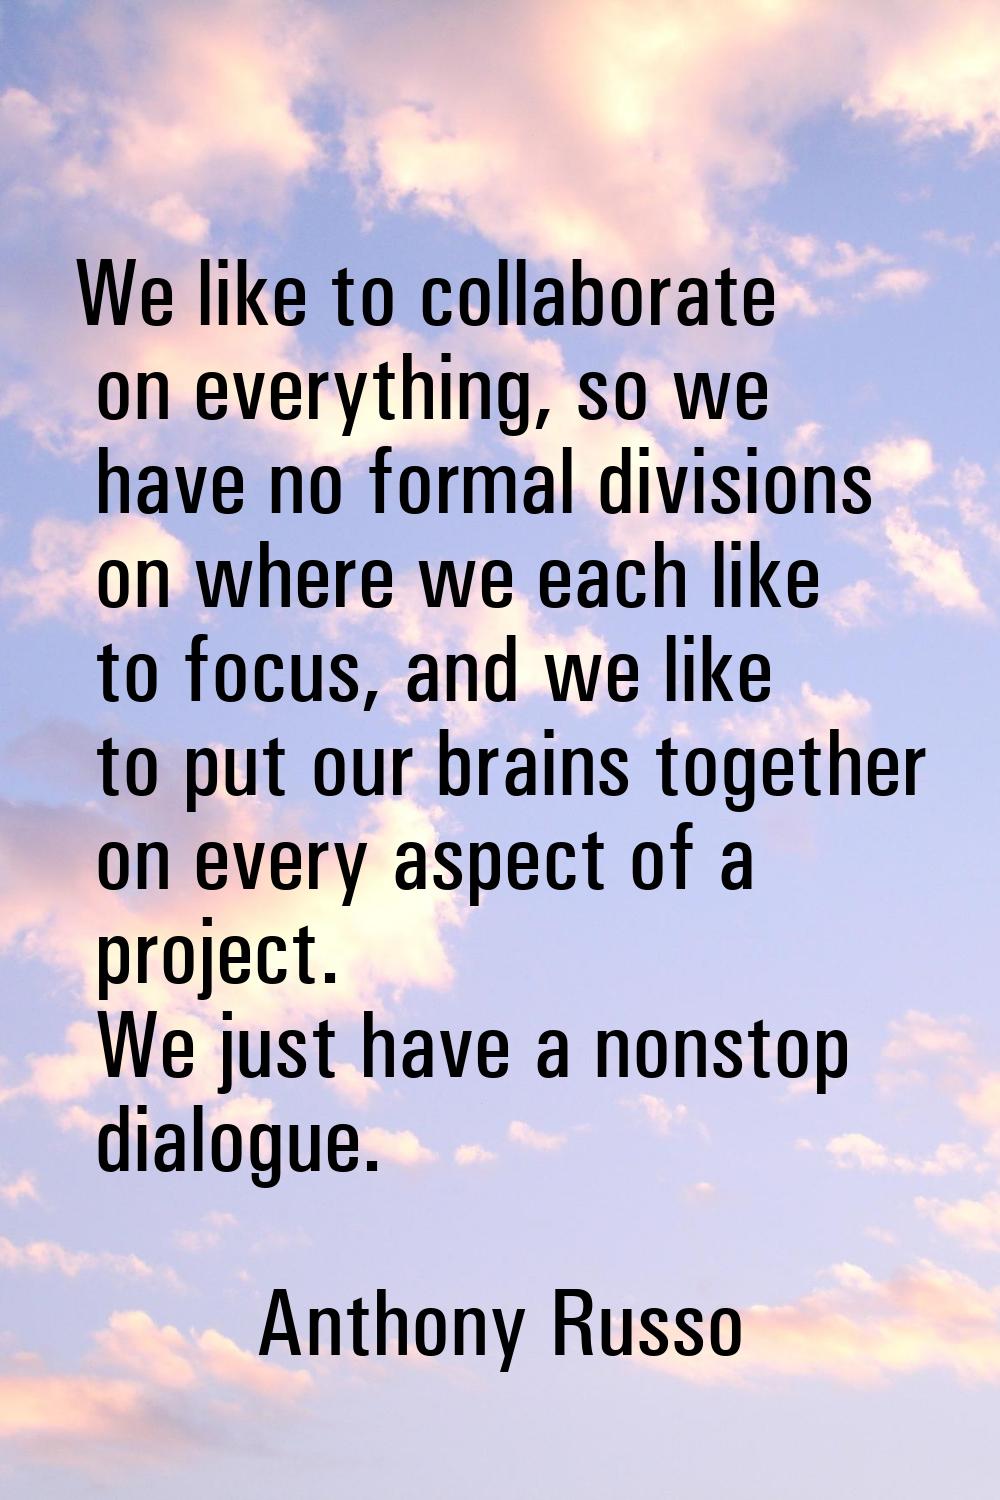 We like to collaborate on everything, so we have no formal divisions on where we each like to focus